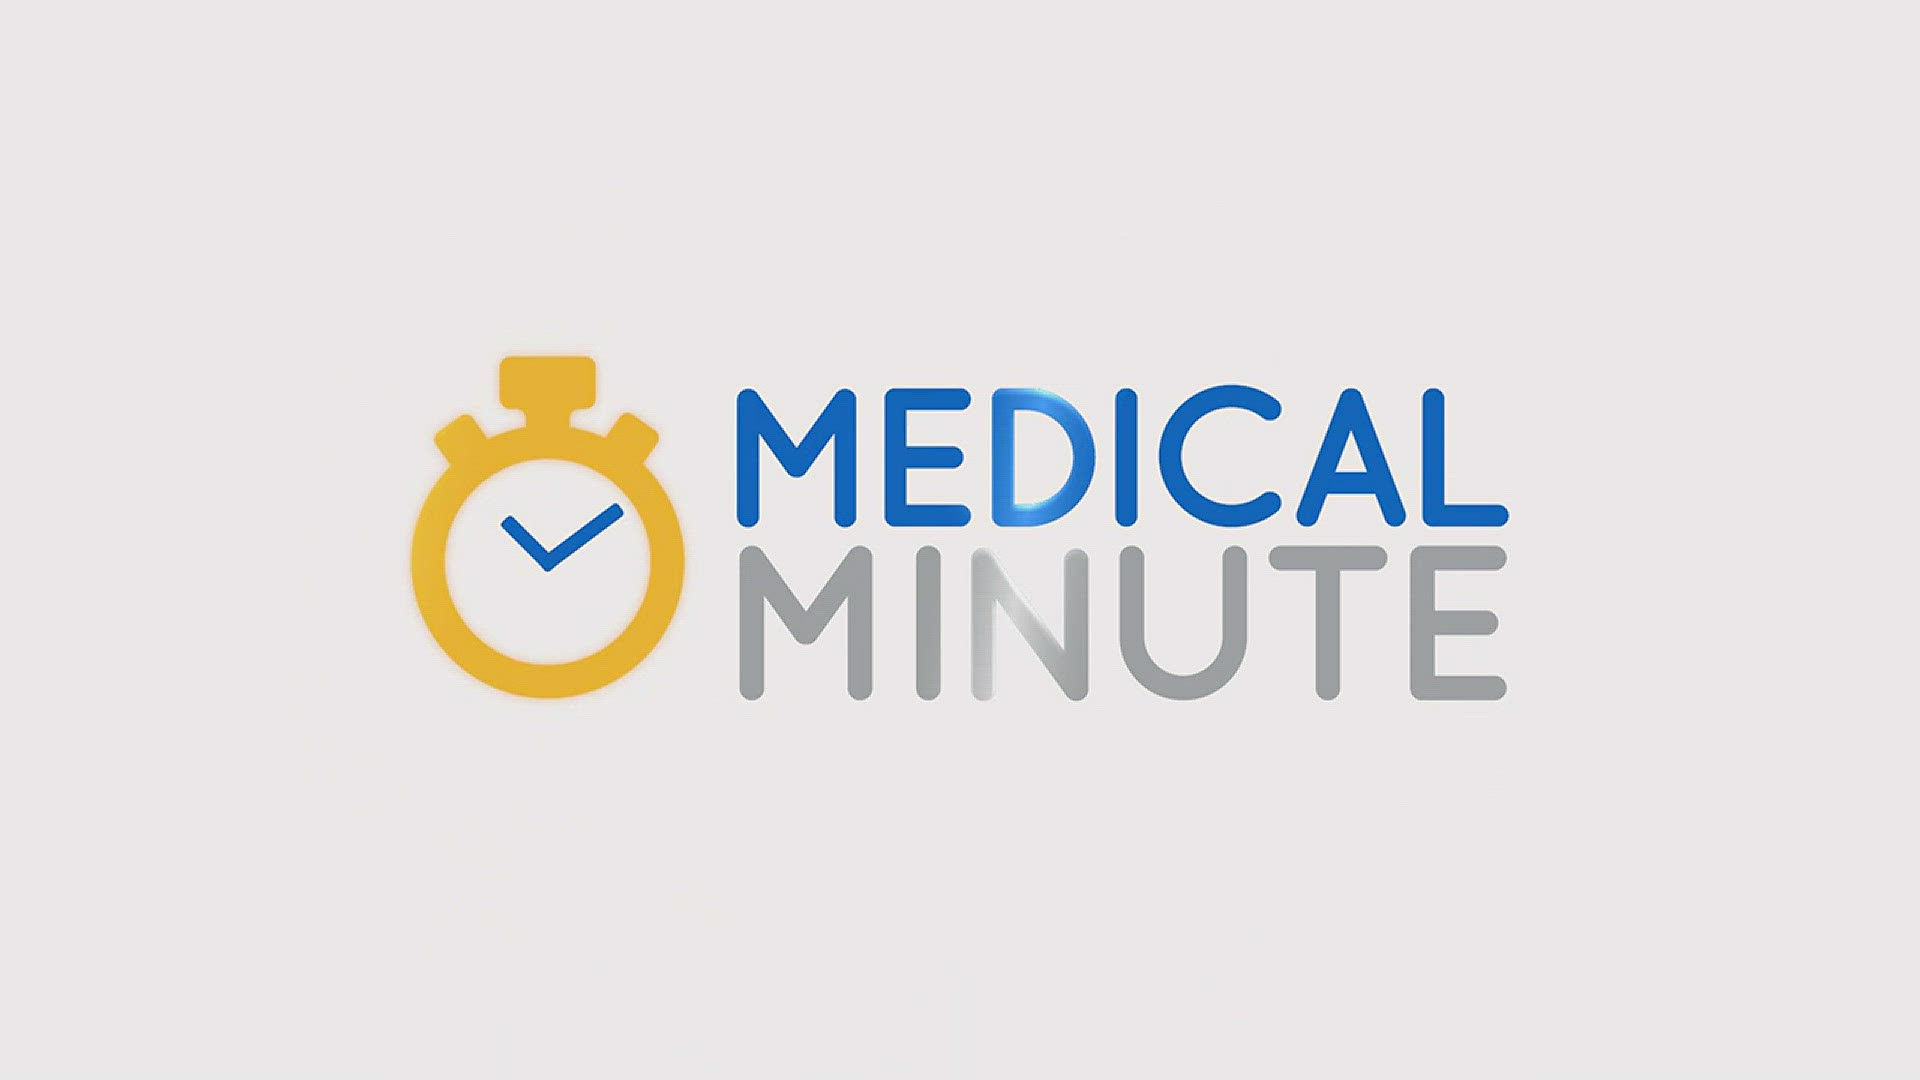 This month's medical minute discusses the issues and solutions associated of being overweight.